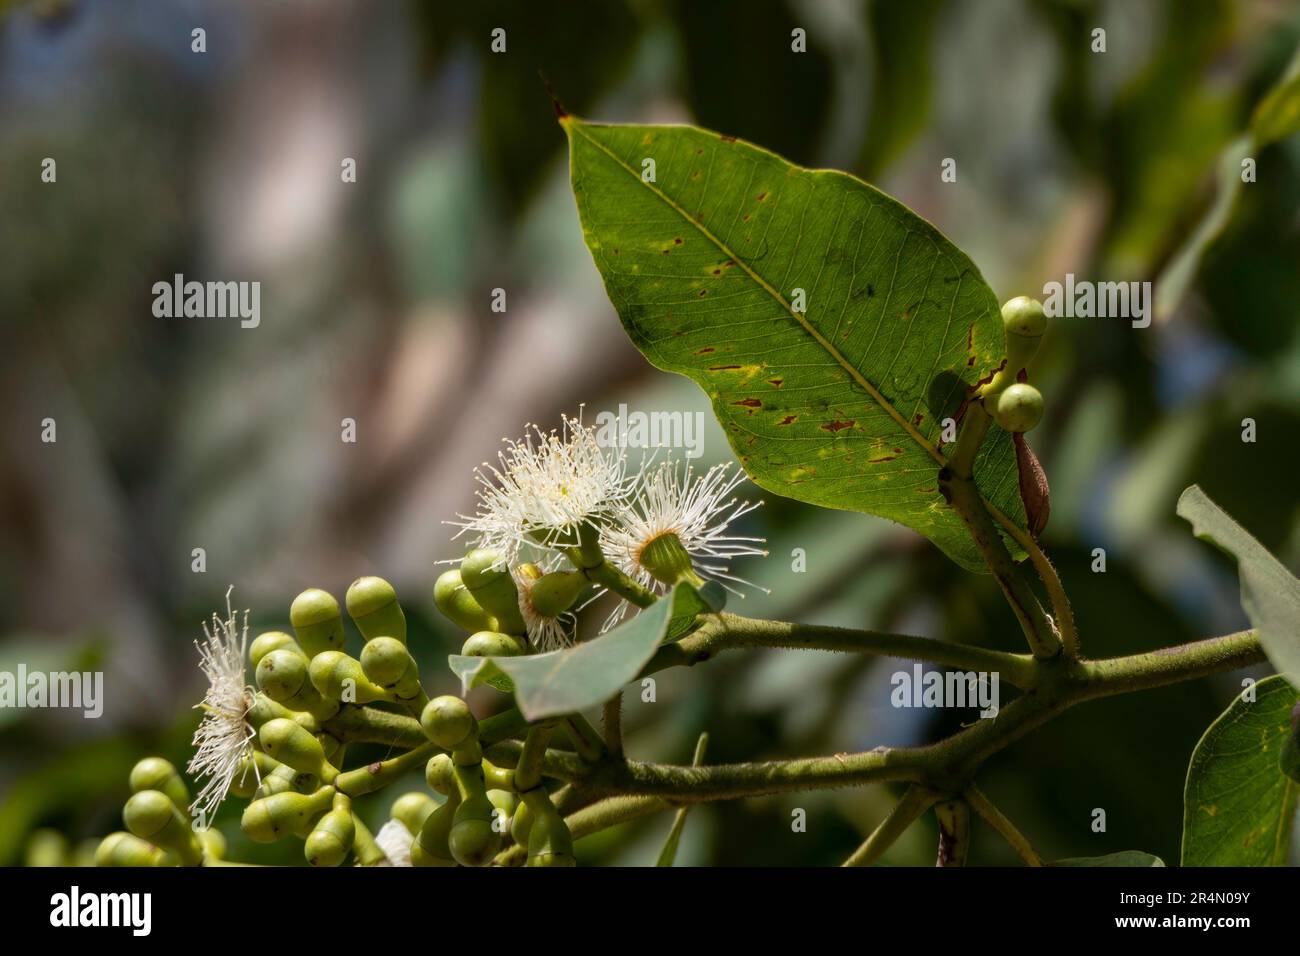 Buds and flowers of a myrtle plant close up on a blurred background. Selective focus Stock Photo